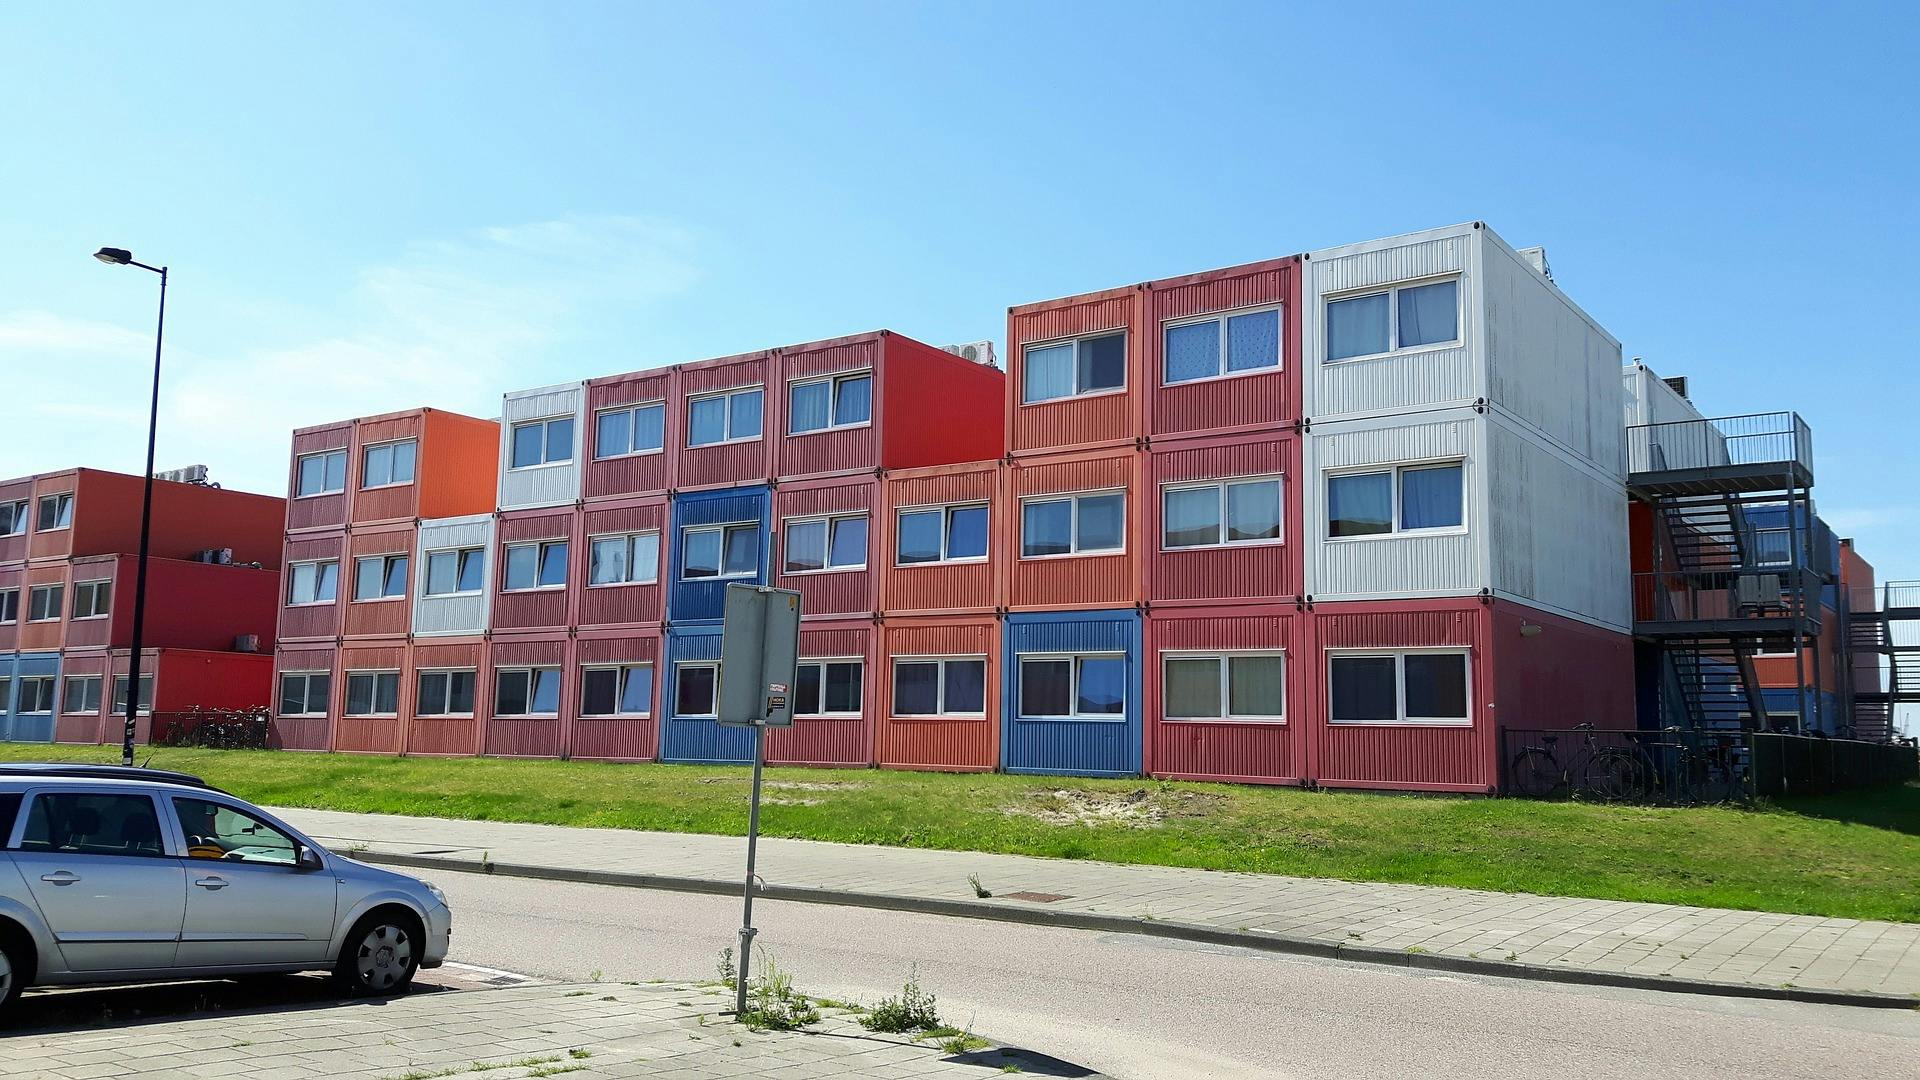 Photo of rows of container homes